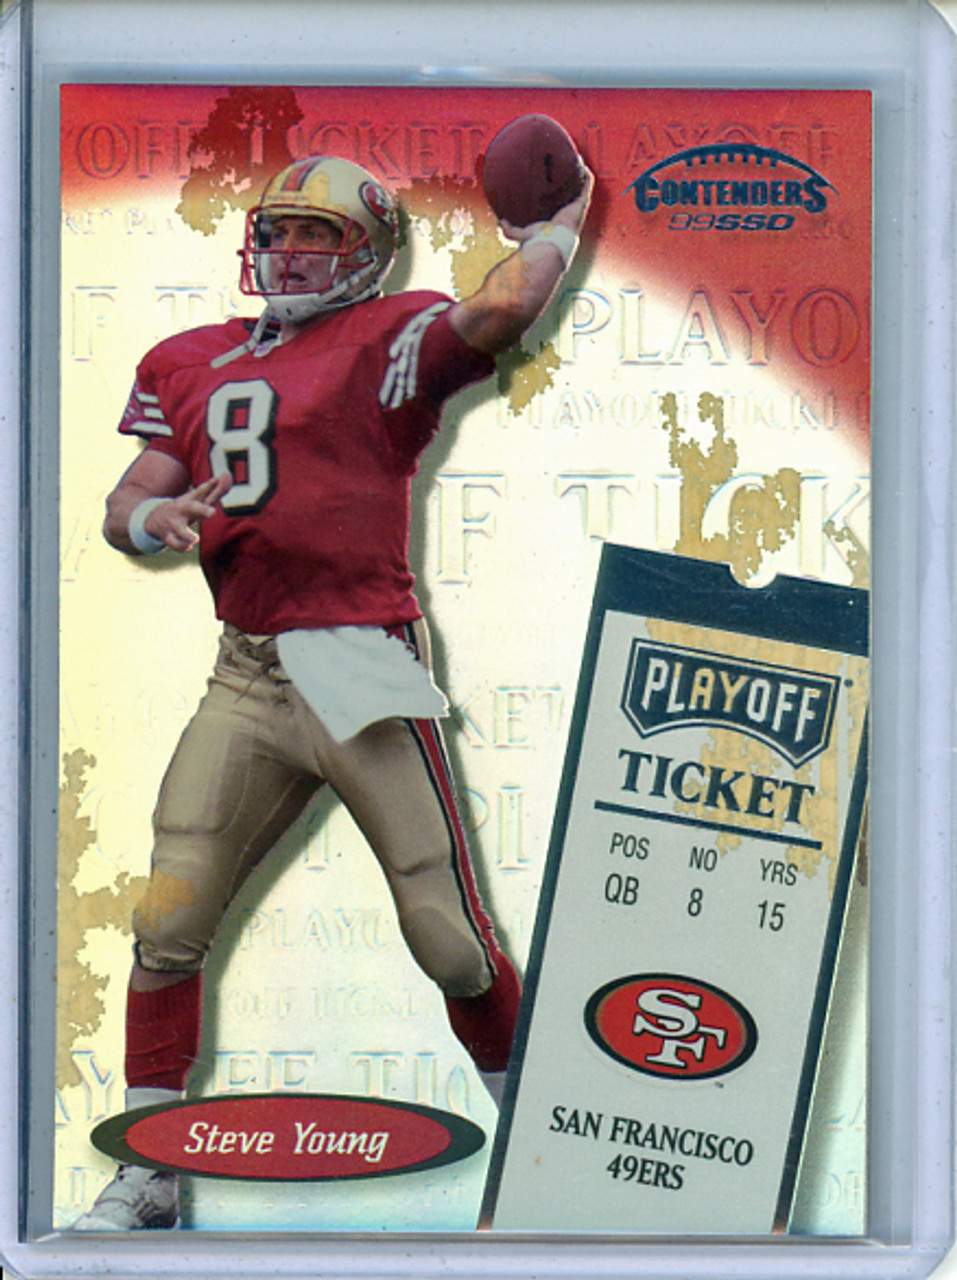 Steve Young 1999 Playoff Contenders SSD #190 Playoff Ticket (CQ)